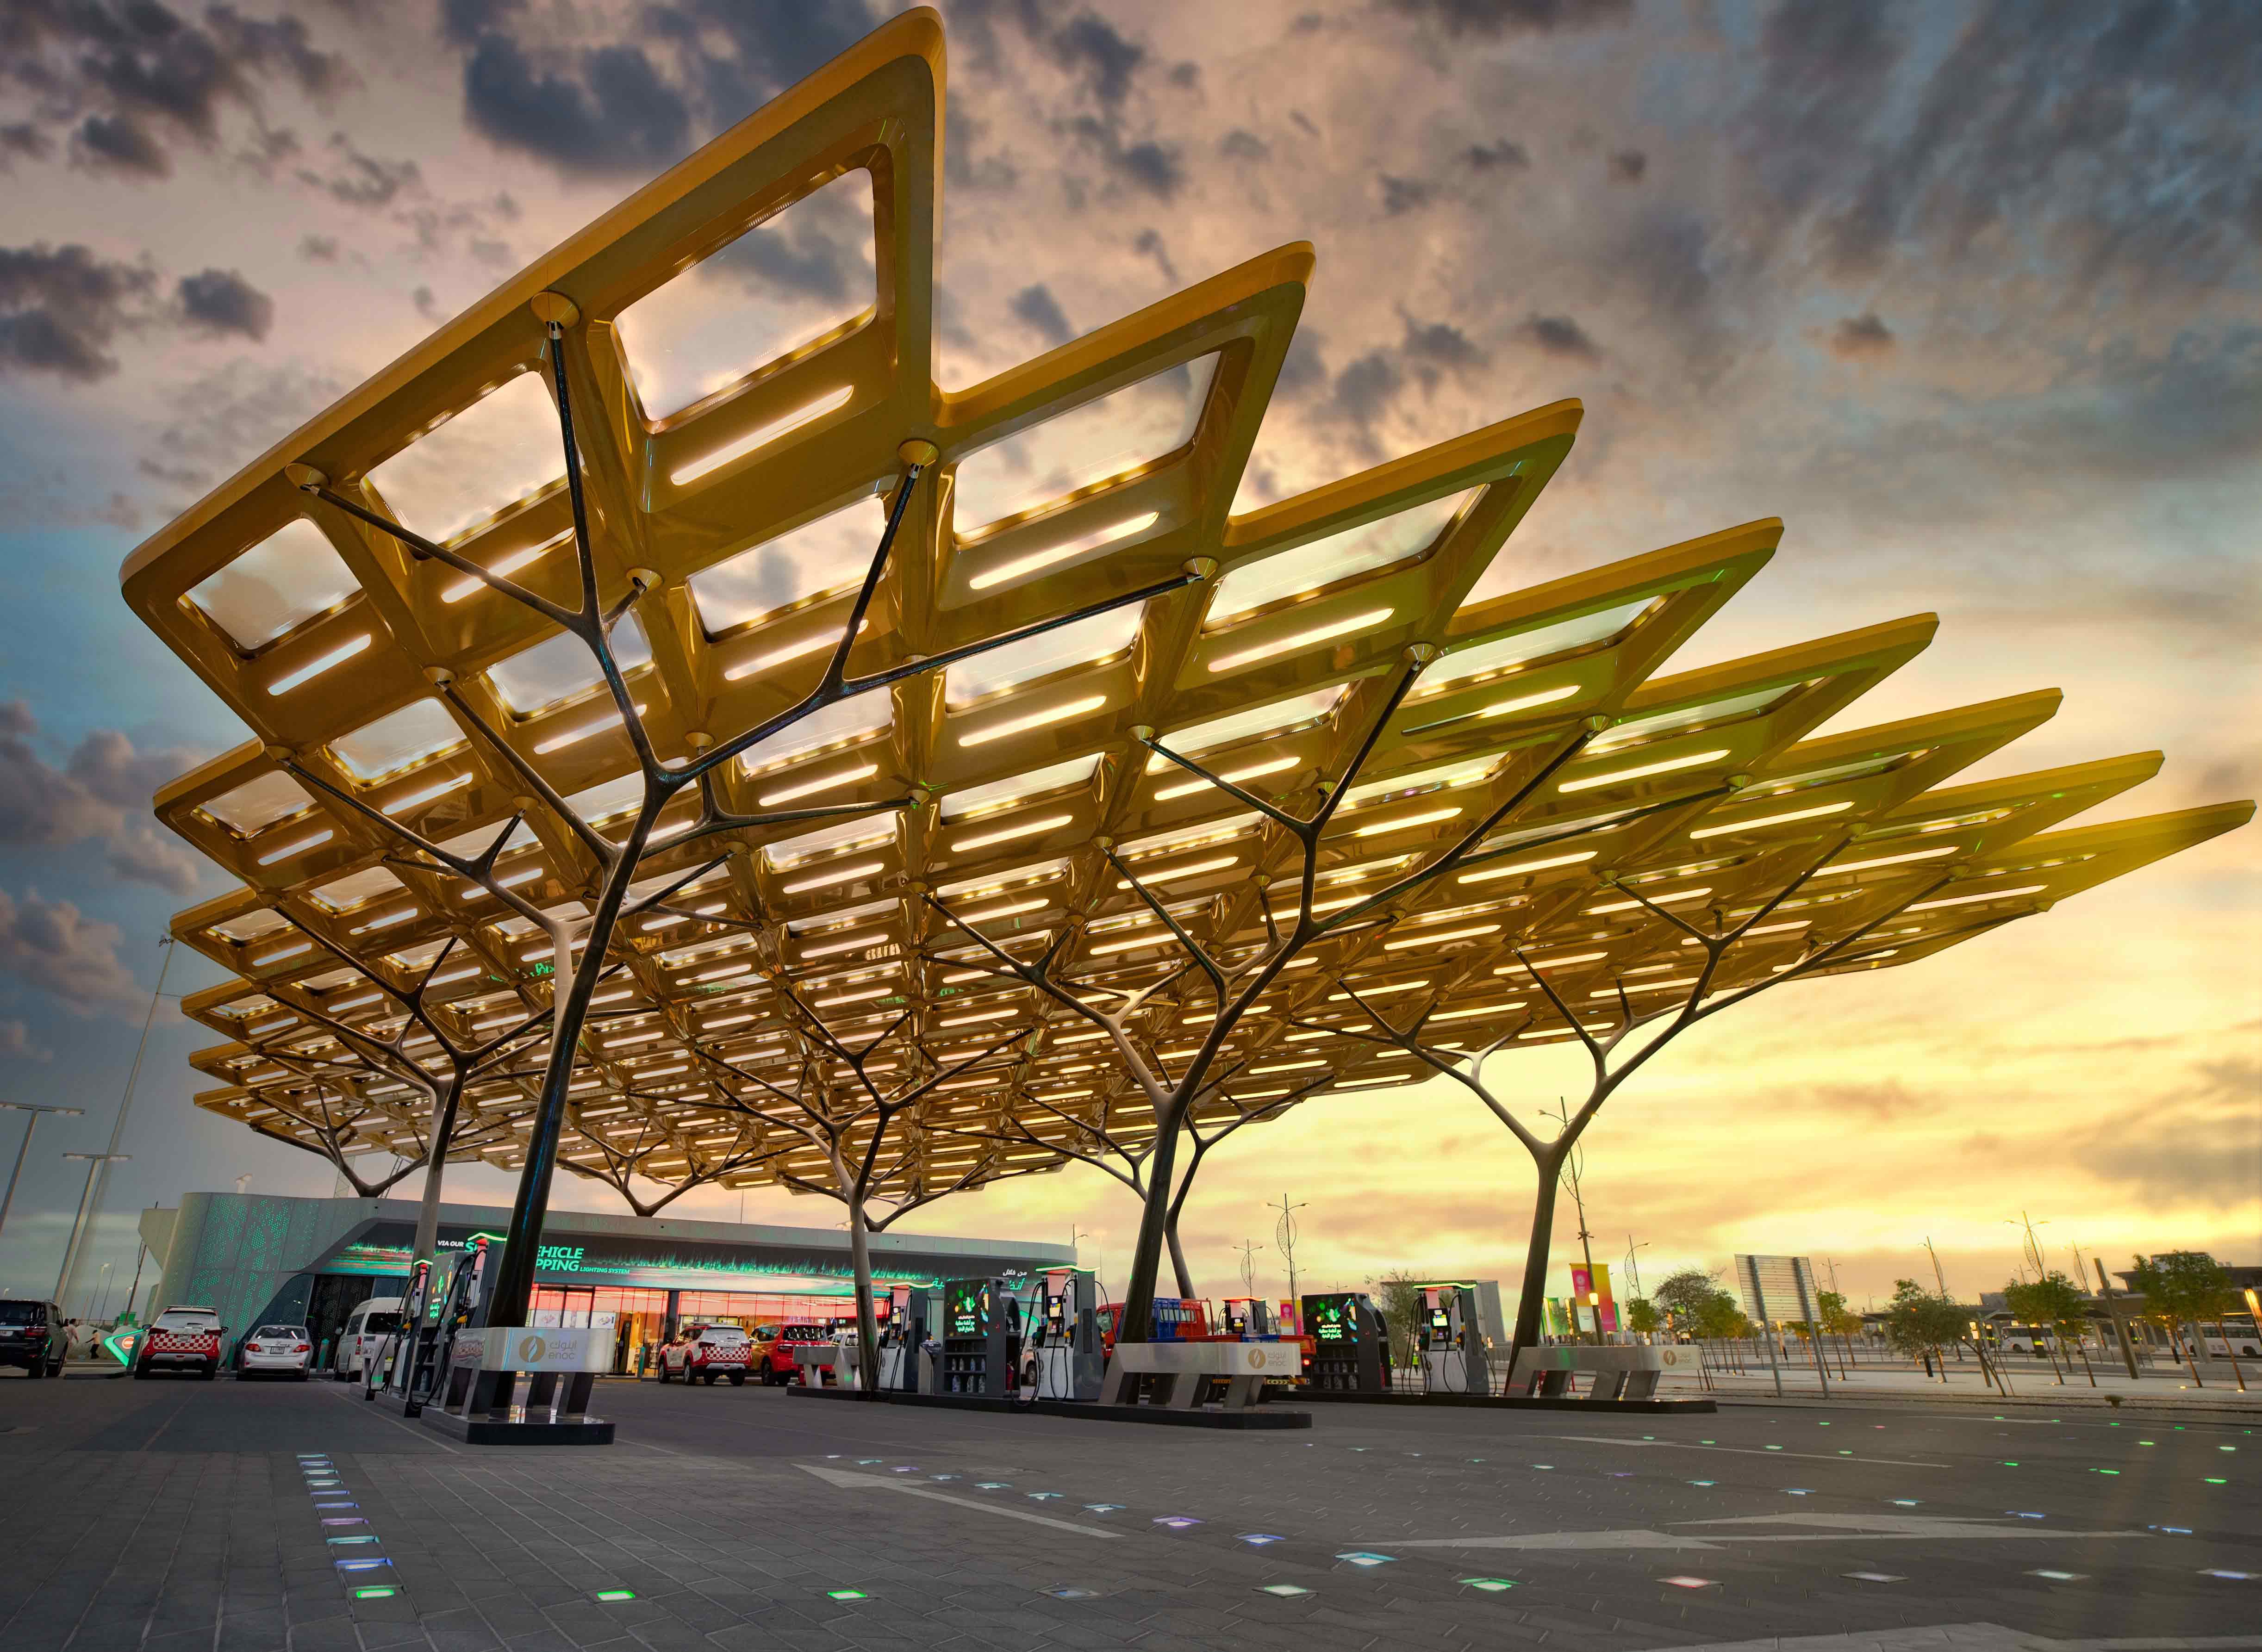 ENOC’s Service Station of the Future honoured for its sustainability, innovation and design